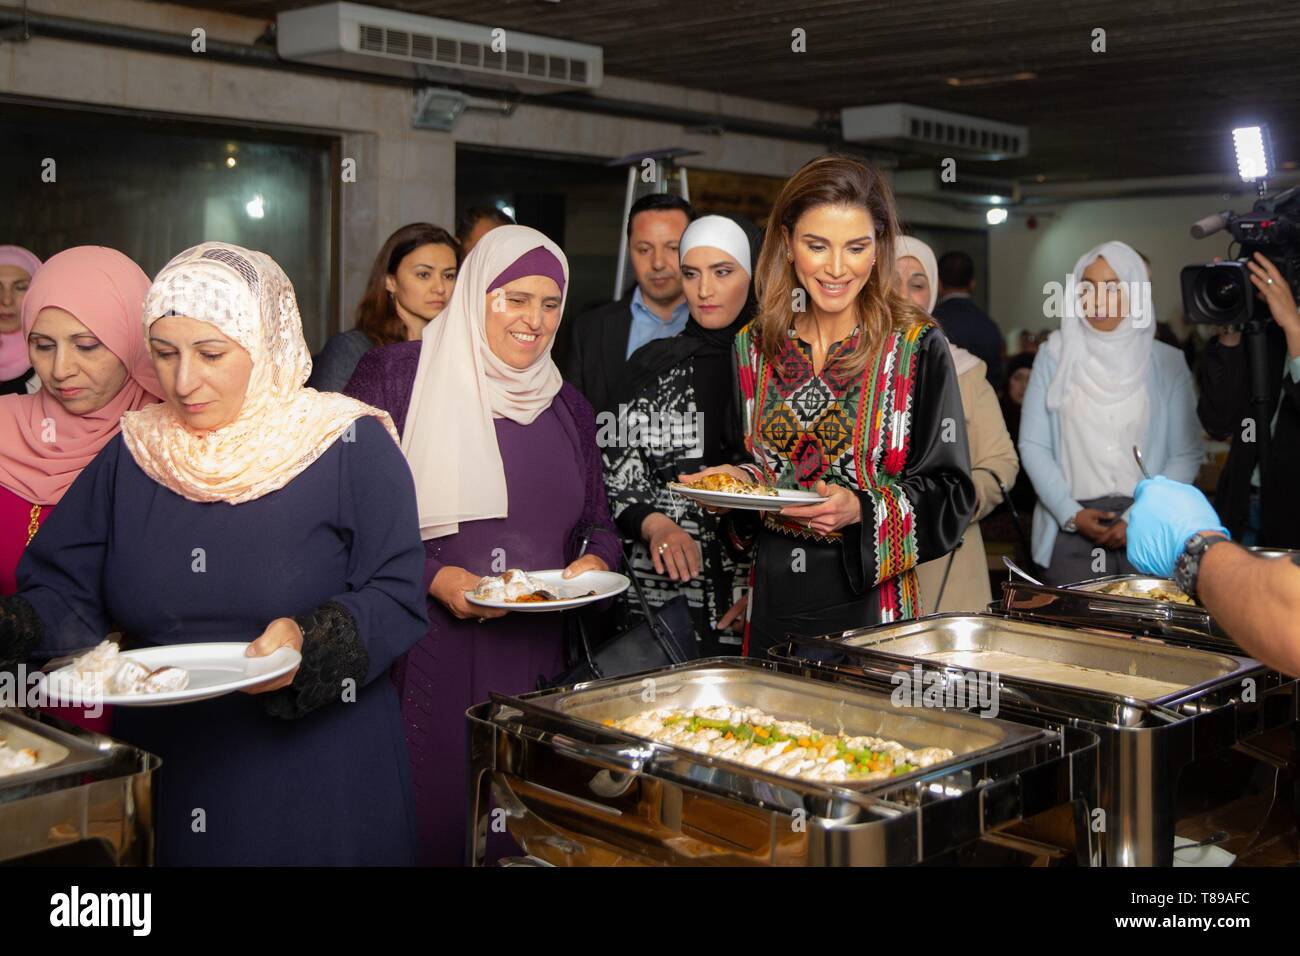 Ajloun, Jordan. 07th May, 2019. Queen Rania joins a group of women for Iftar in Ajloun, on May 07, 2019, she hosted an Iftar banquet at the Royal Academy for Nature Conservation Restaurant for a group of women active in civil society, education, and volunteer work Credit: Royal Hashemite Court/Albert Ph van der Werf/Netherlands OUT/Point De Vue OUT |/dpa/Alamy Live News Stock Photo